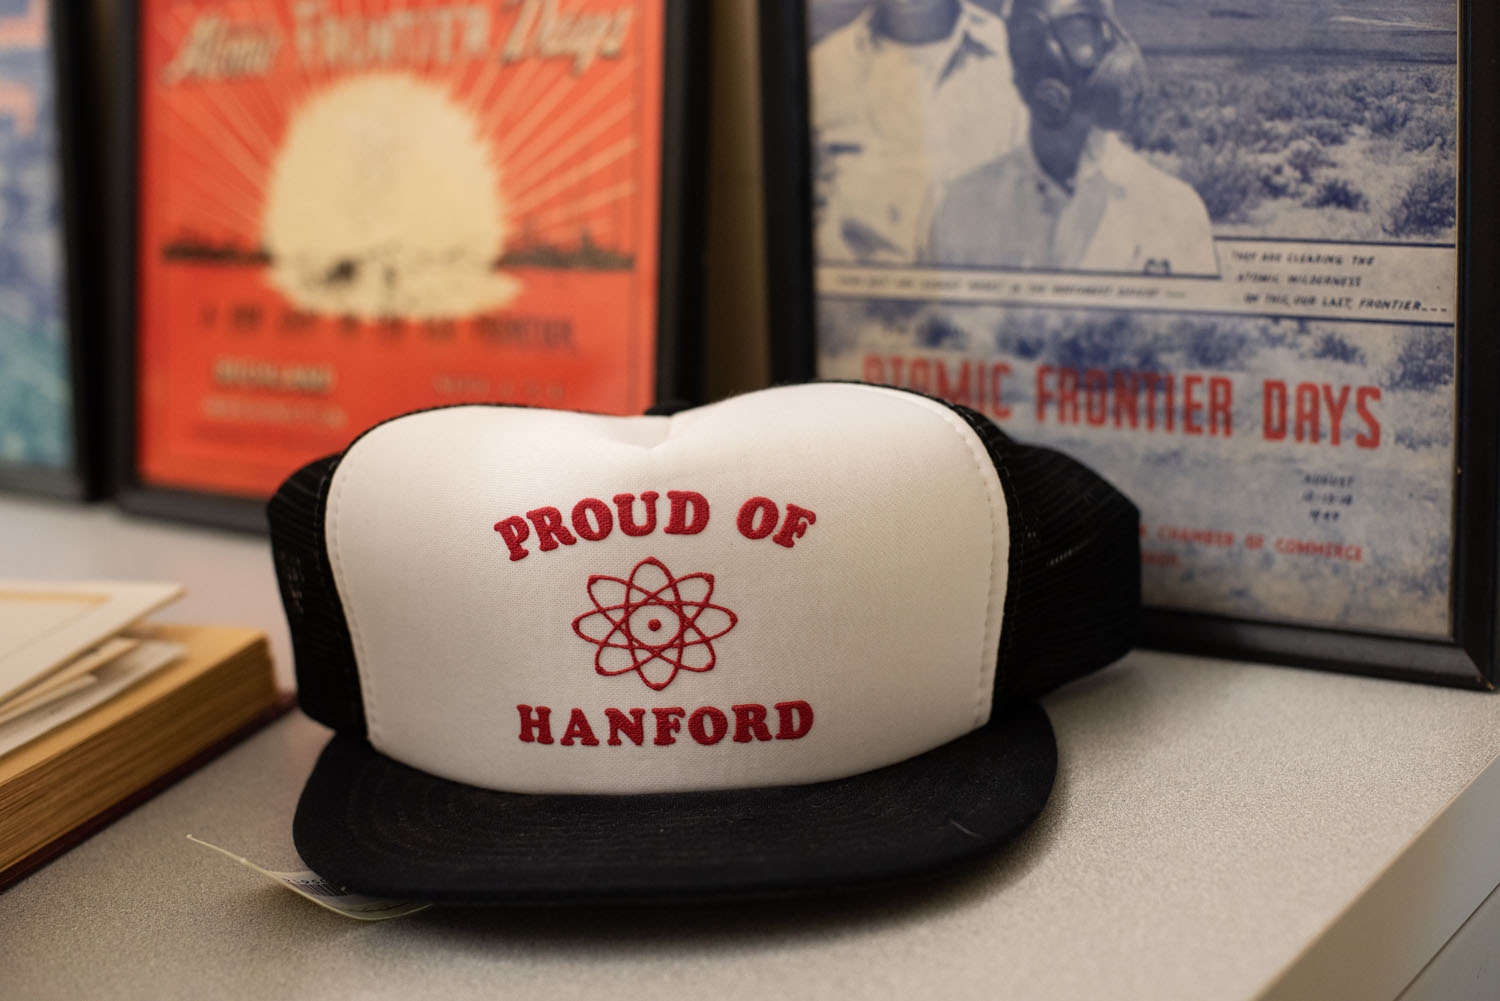 Memorabilia from the Hanford History Project’s office at Washington State University Tri-Cities. Photography by Sean McDermott.